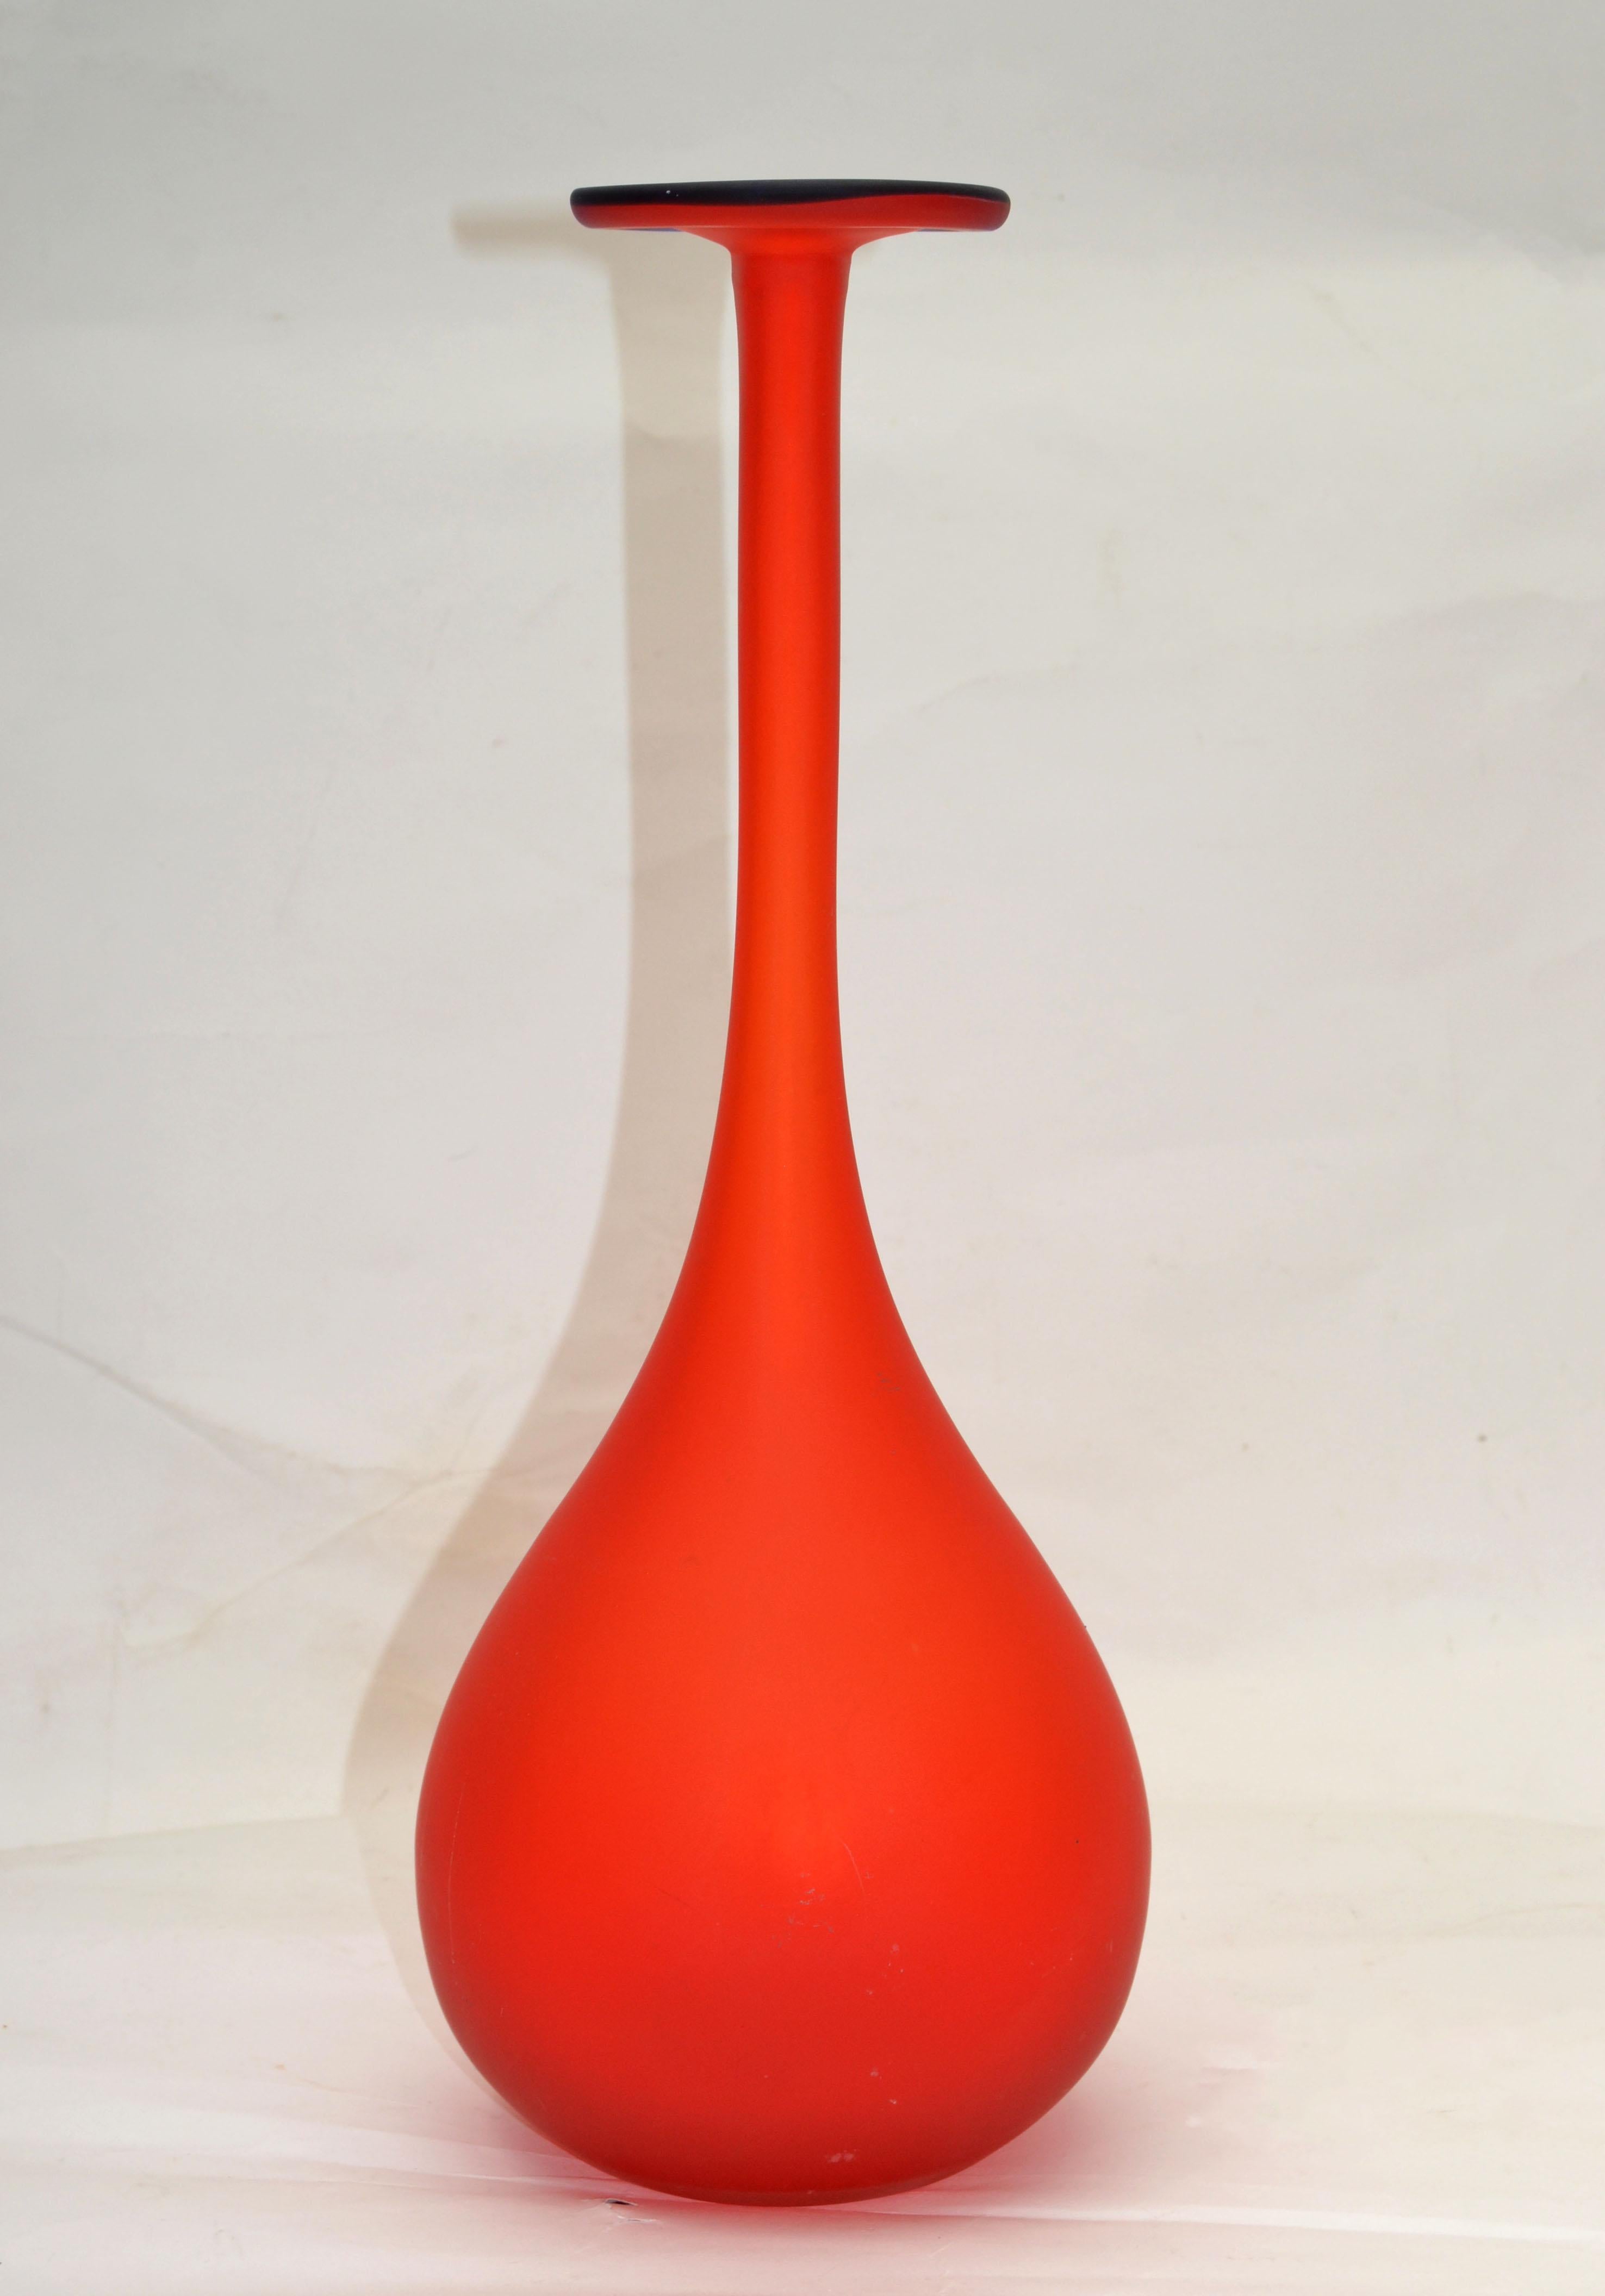 20th Century Vase Moretti Style Translucent Red & Blue Satin Glass Bud Vases Italy For Sale